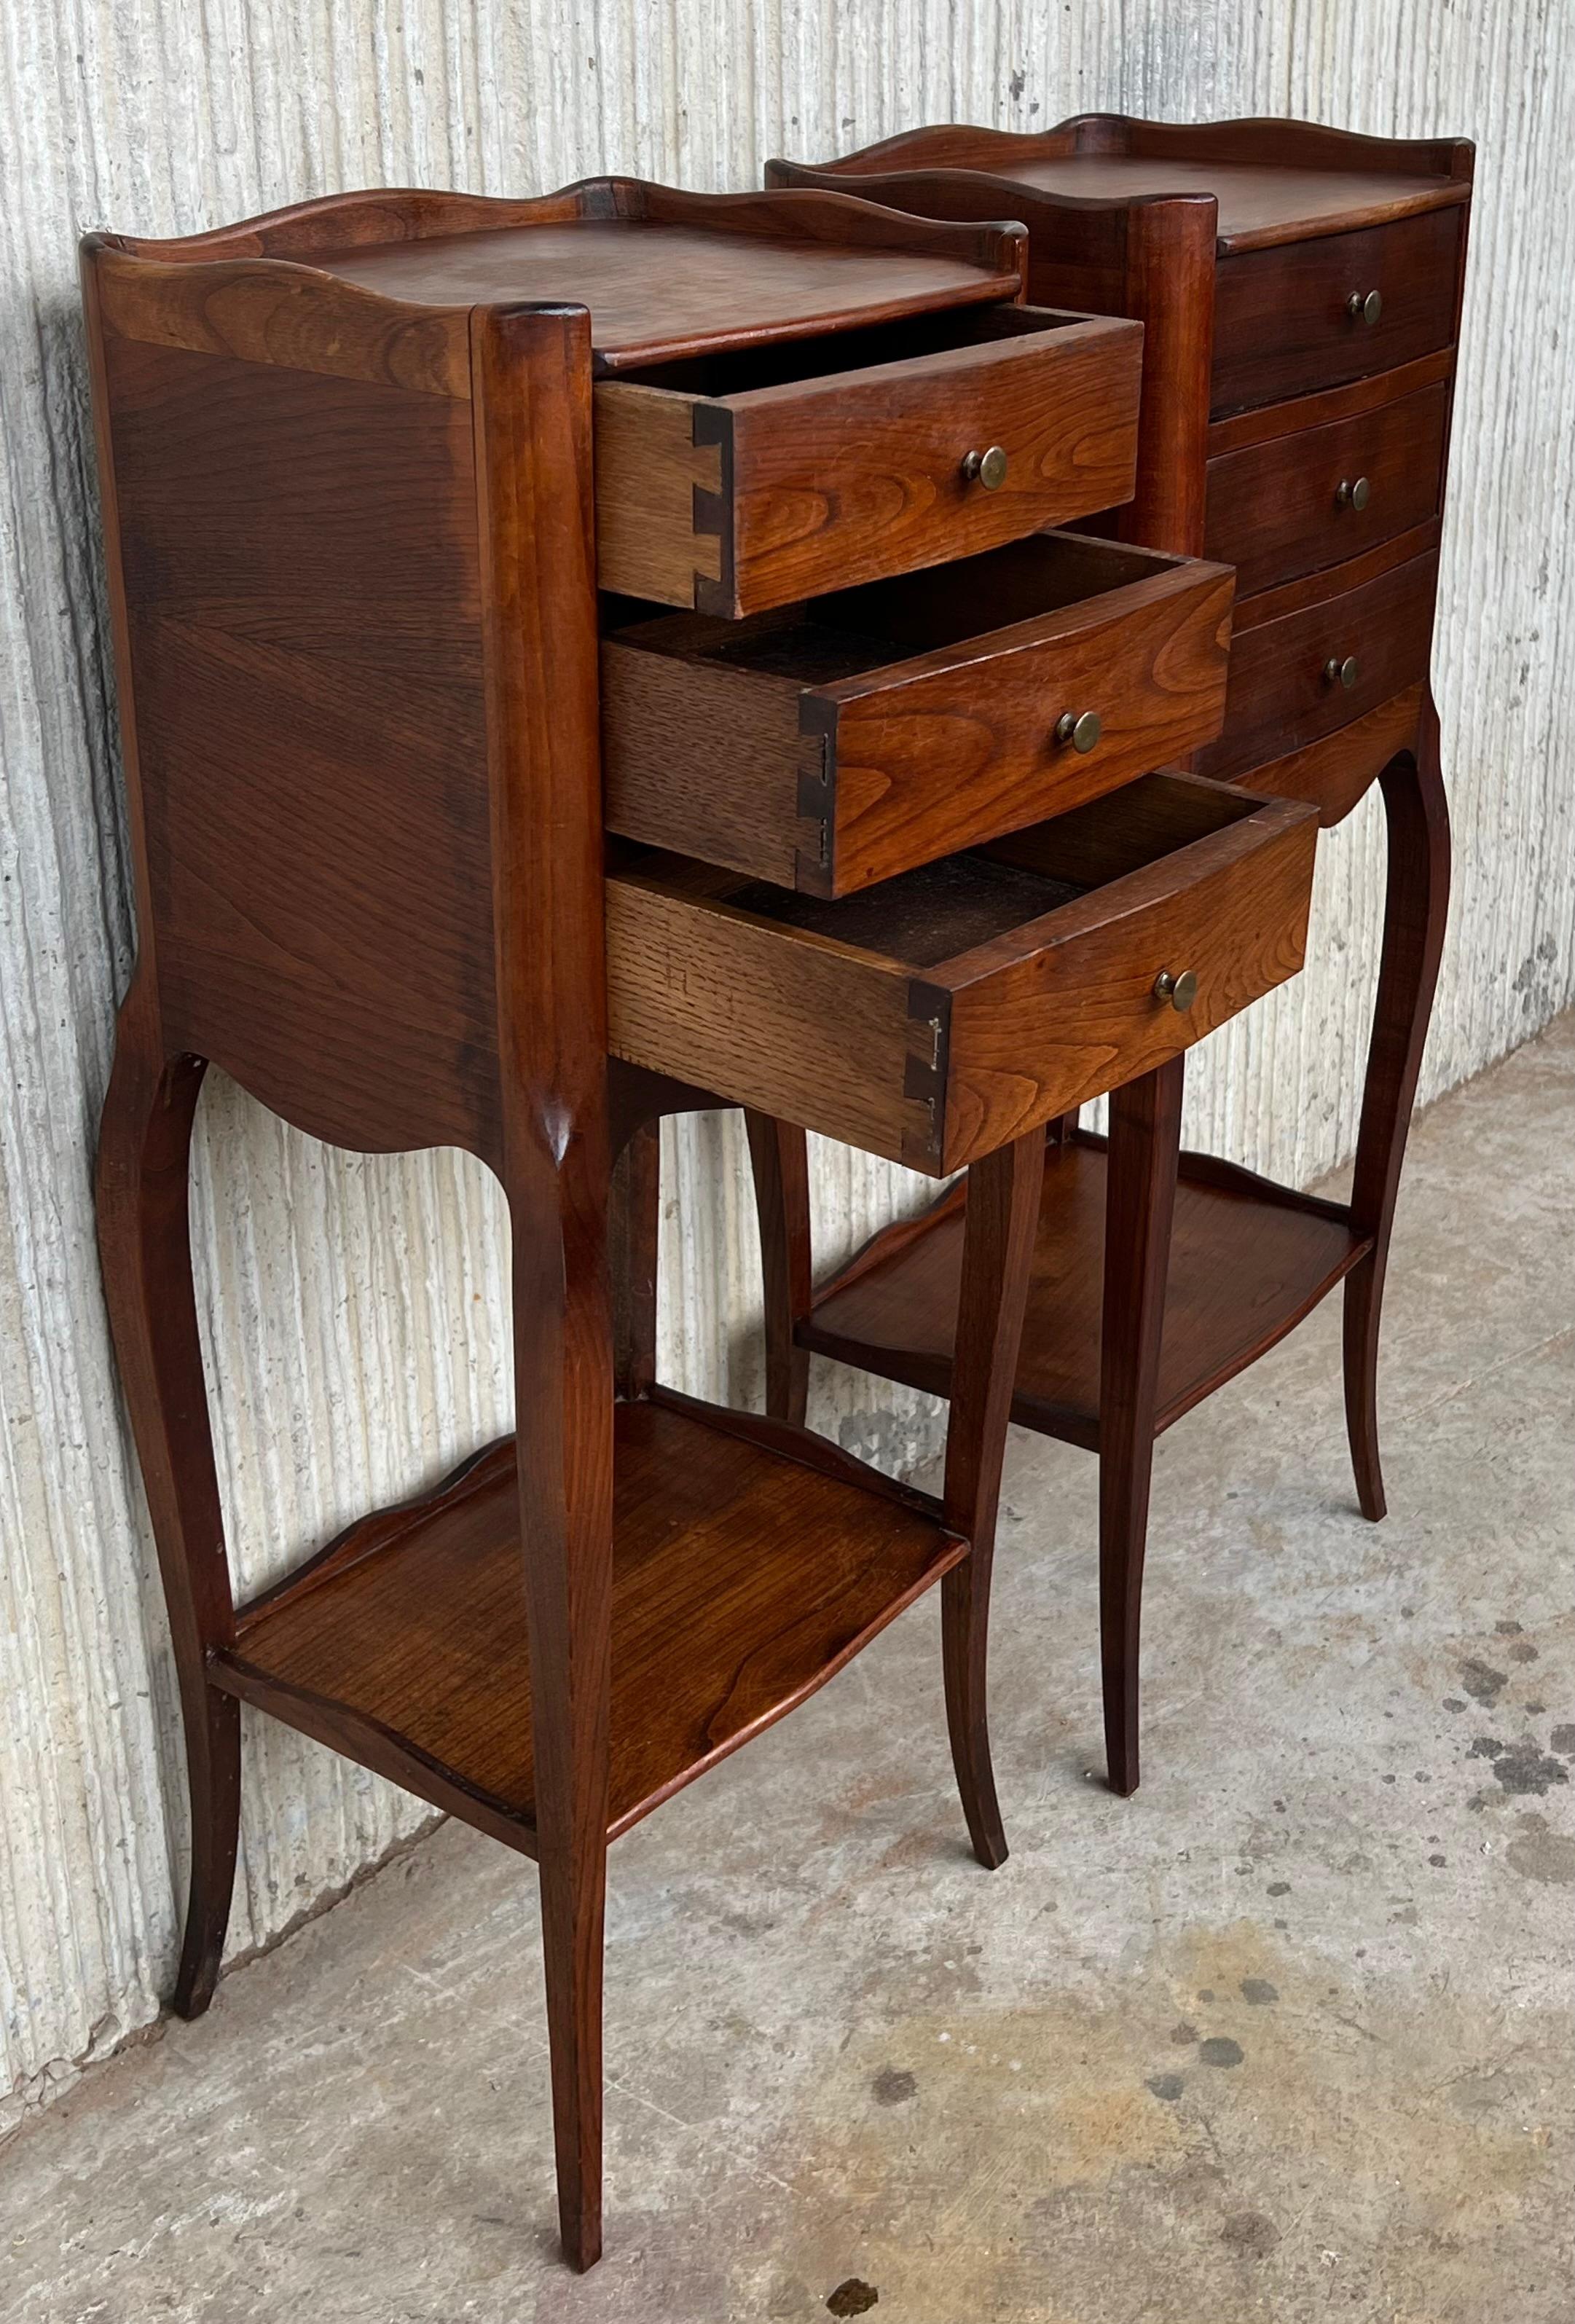 Pair of French Louis XV Style Walnut Bedside Tables with Three Drawers and Shelv 1